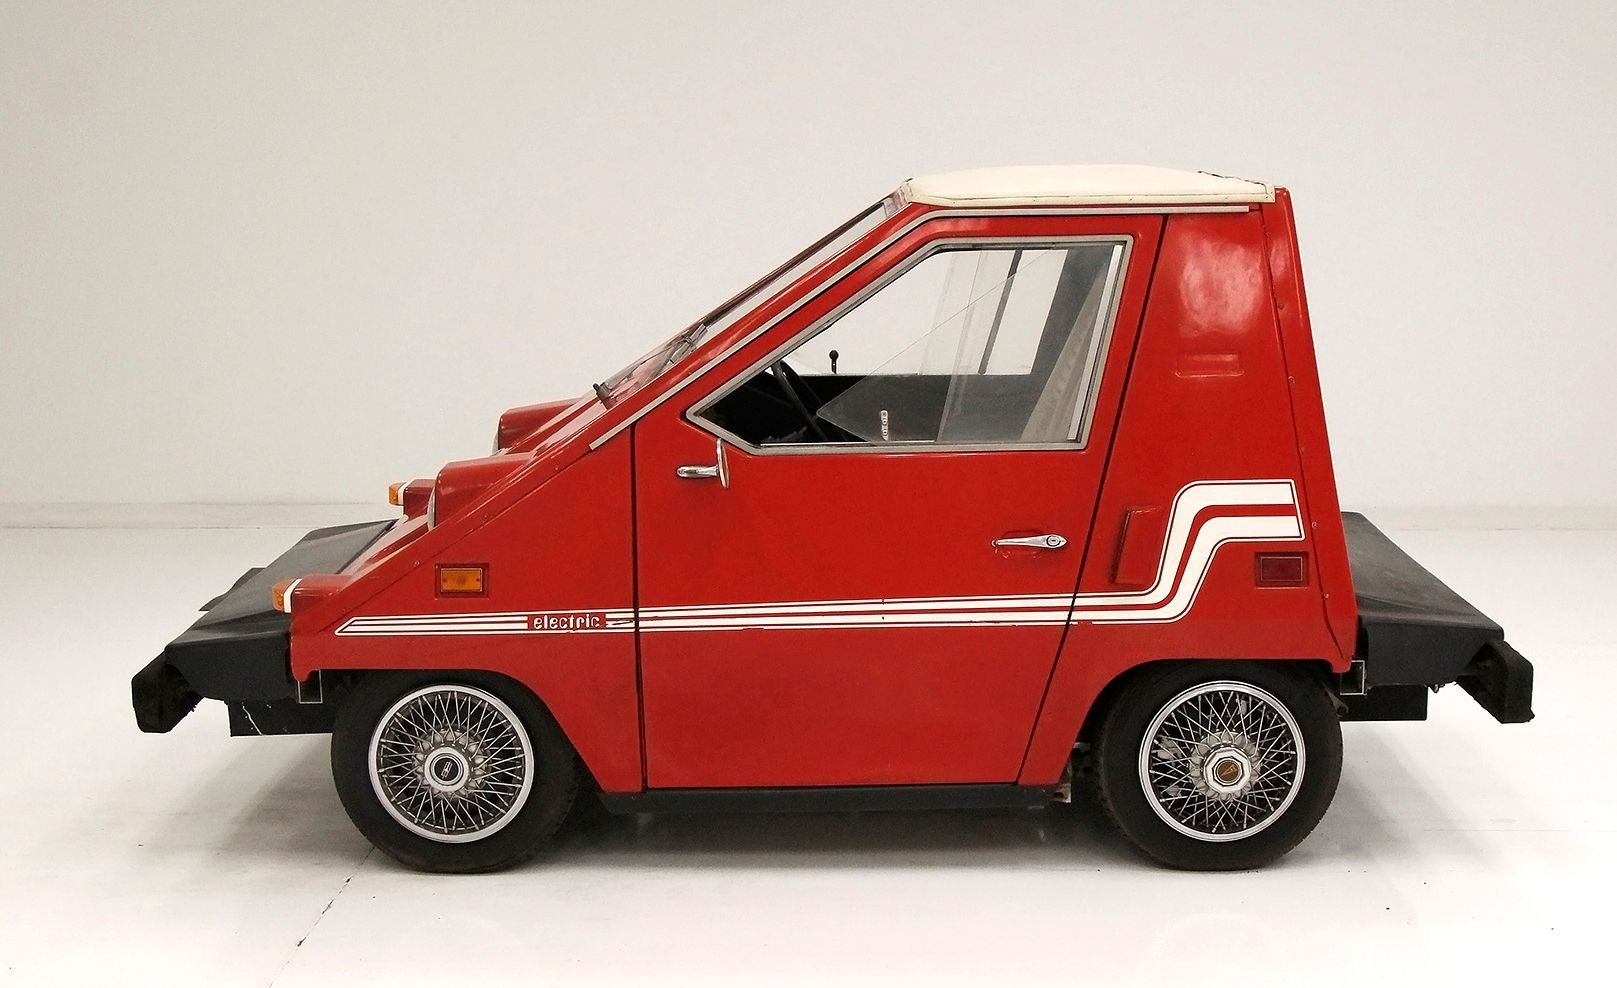 Own A Piece Of EV History With This 1976 Citicar Electric Car